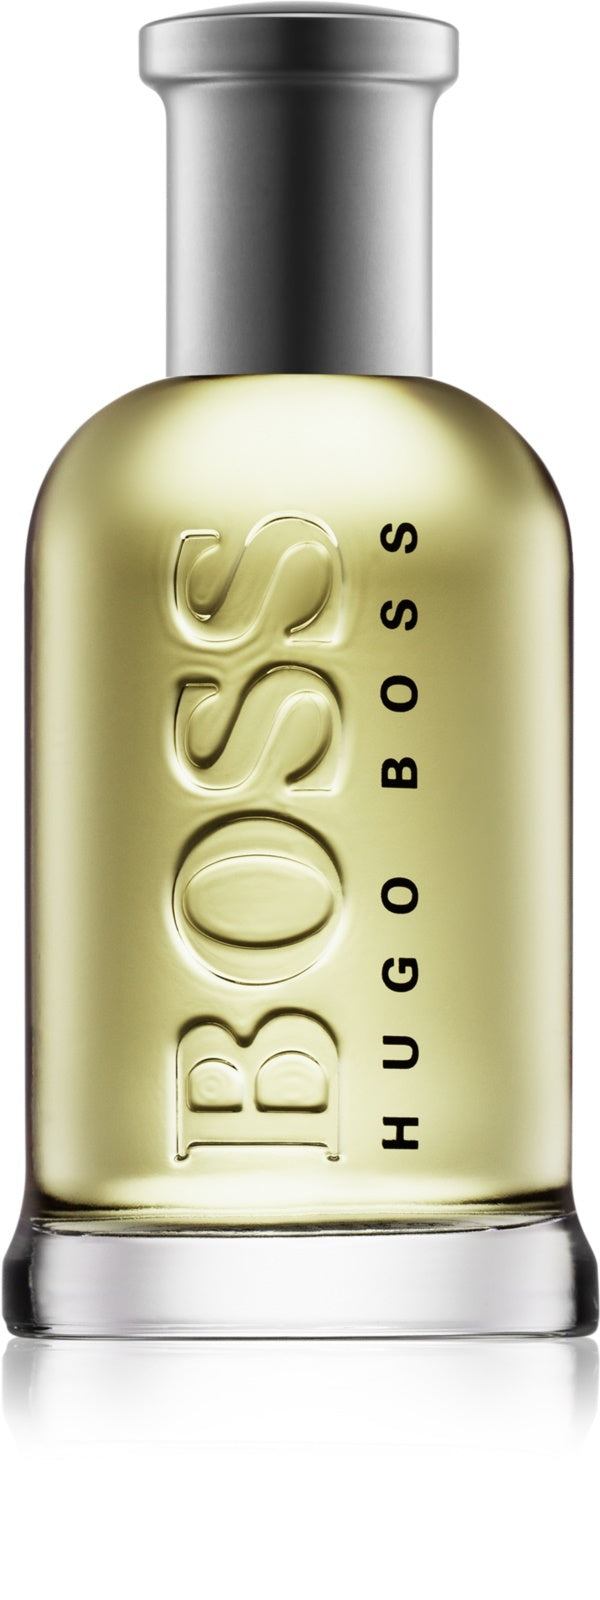 BOSS Bottled Aftershave Lotion